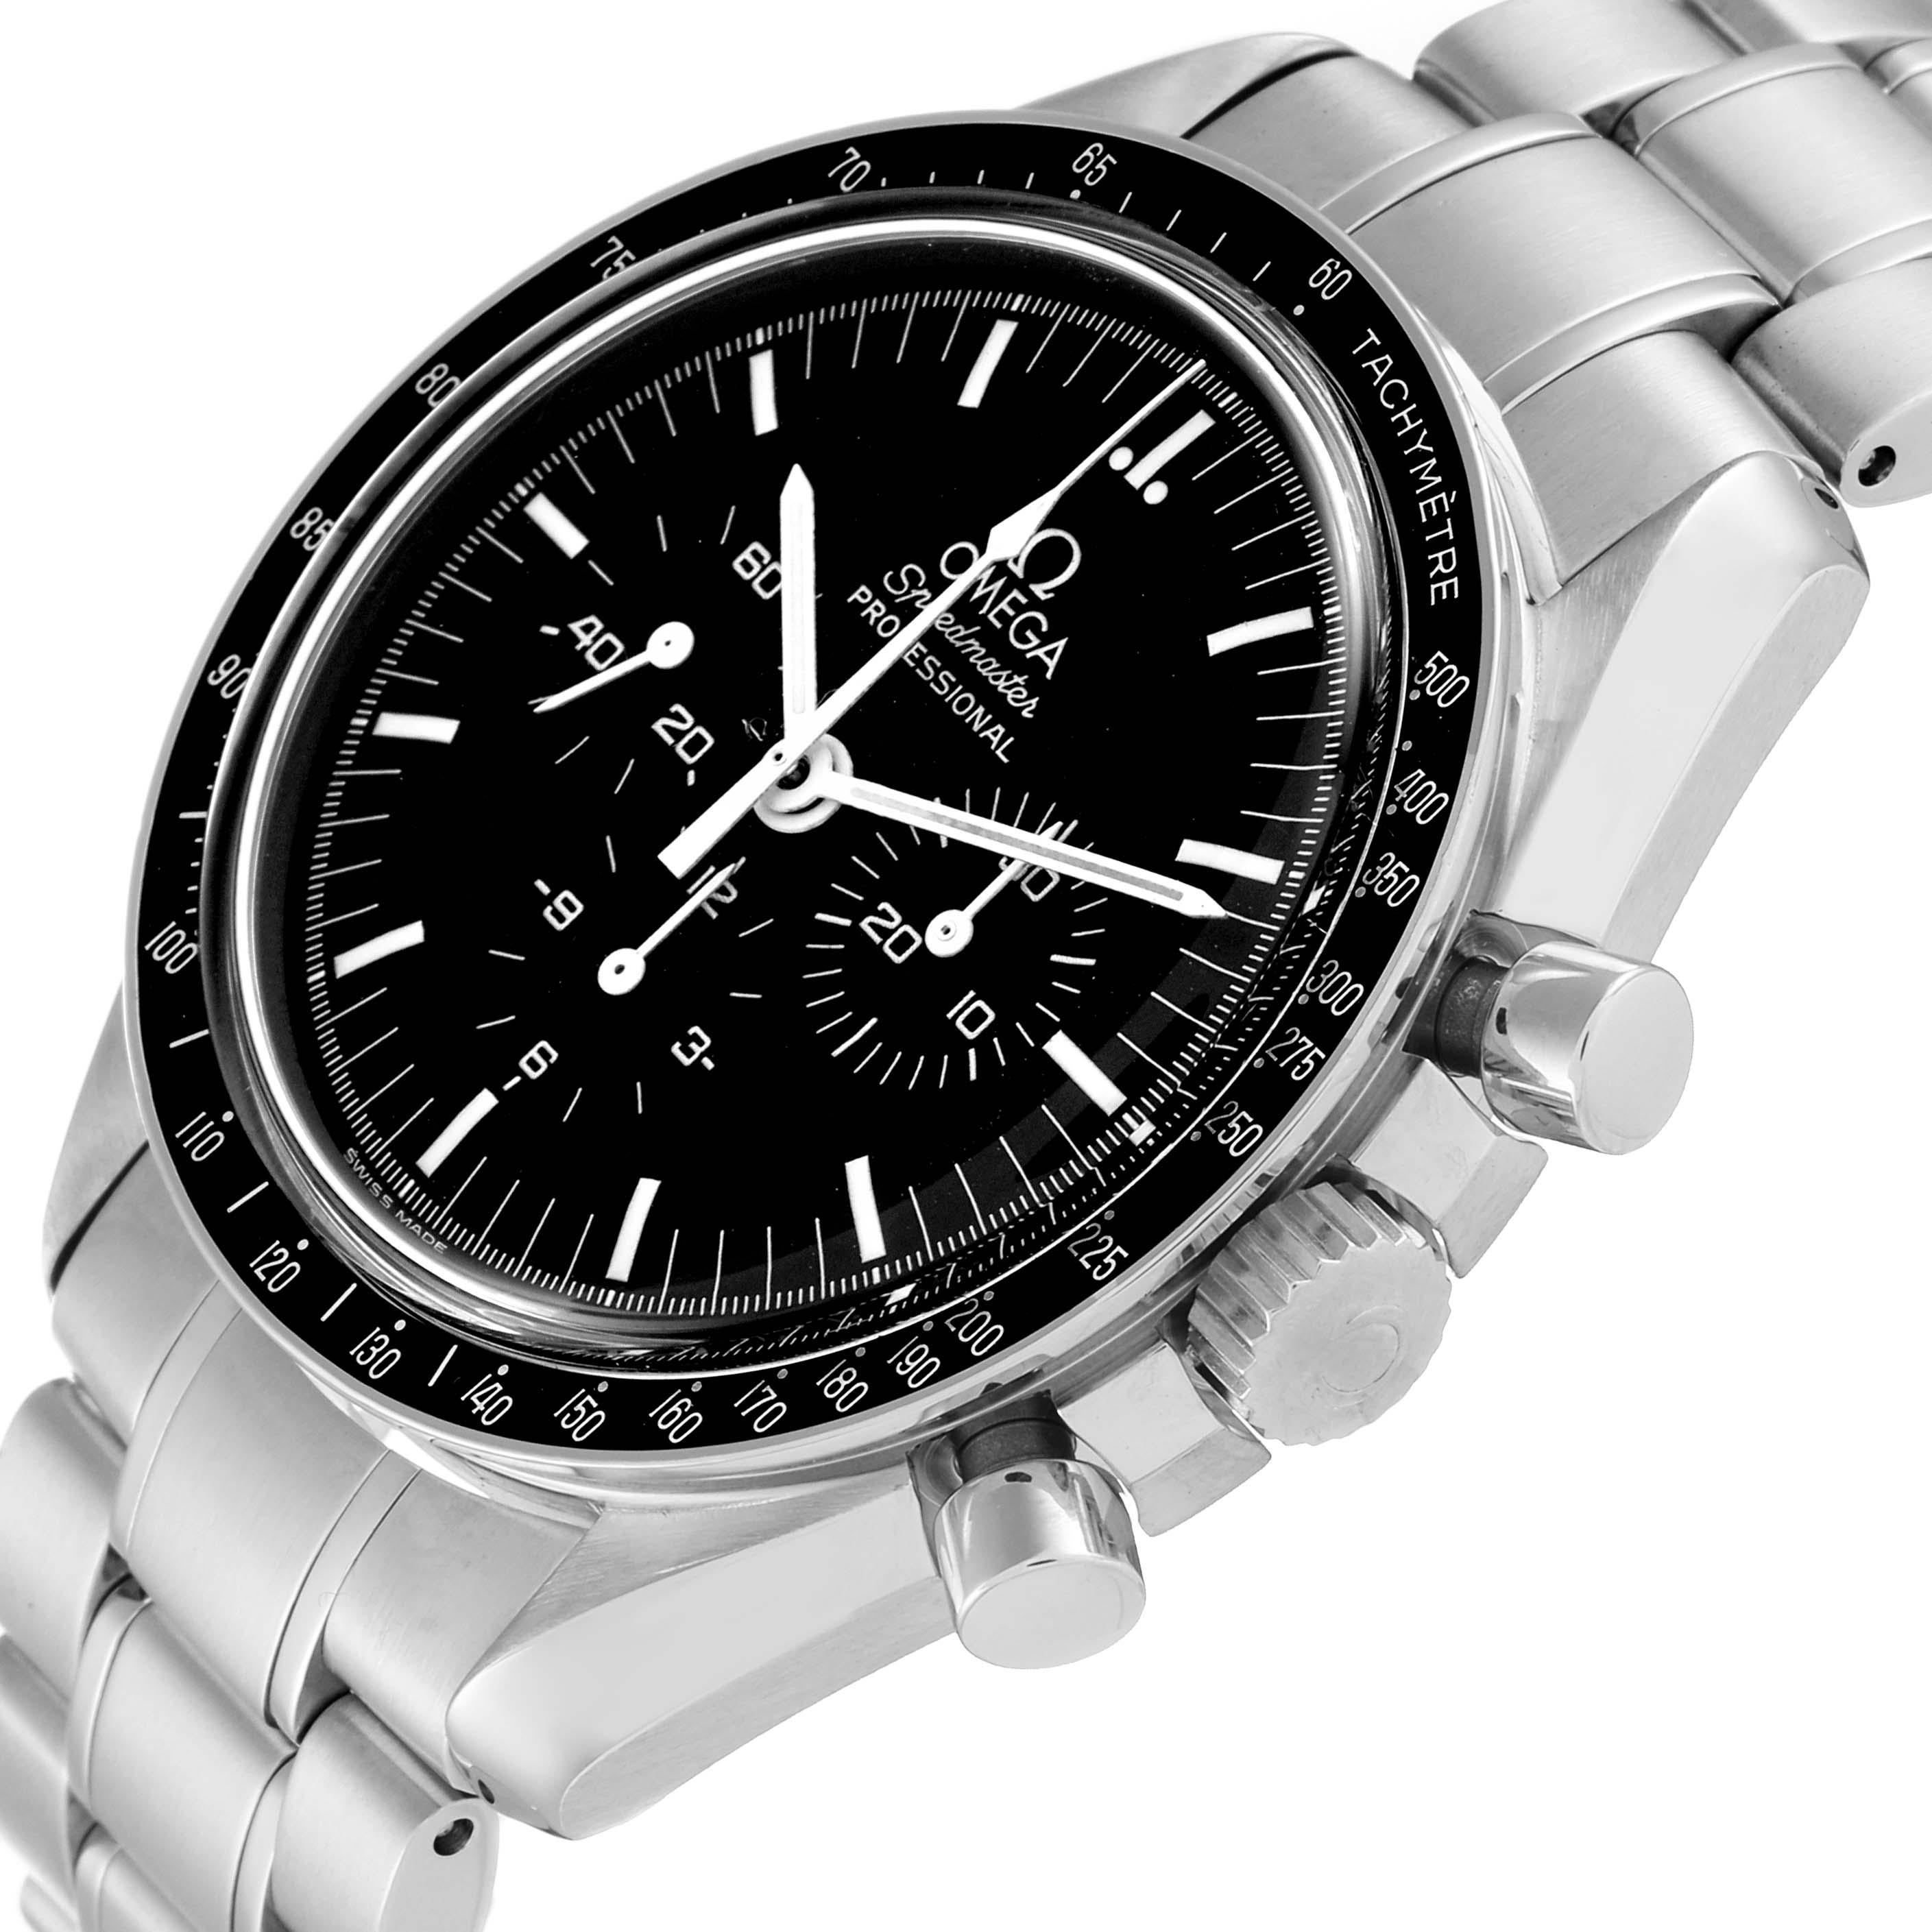 Omega Speedmaster Apollo XVII Limited Edition Mens Watch 3574.51.00 Box Card For Sale 1